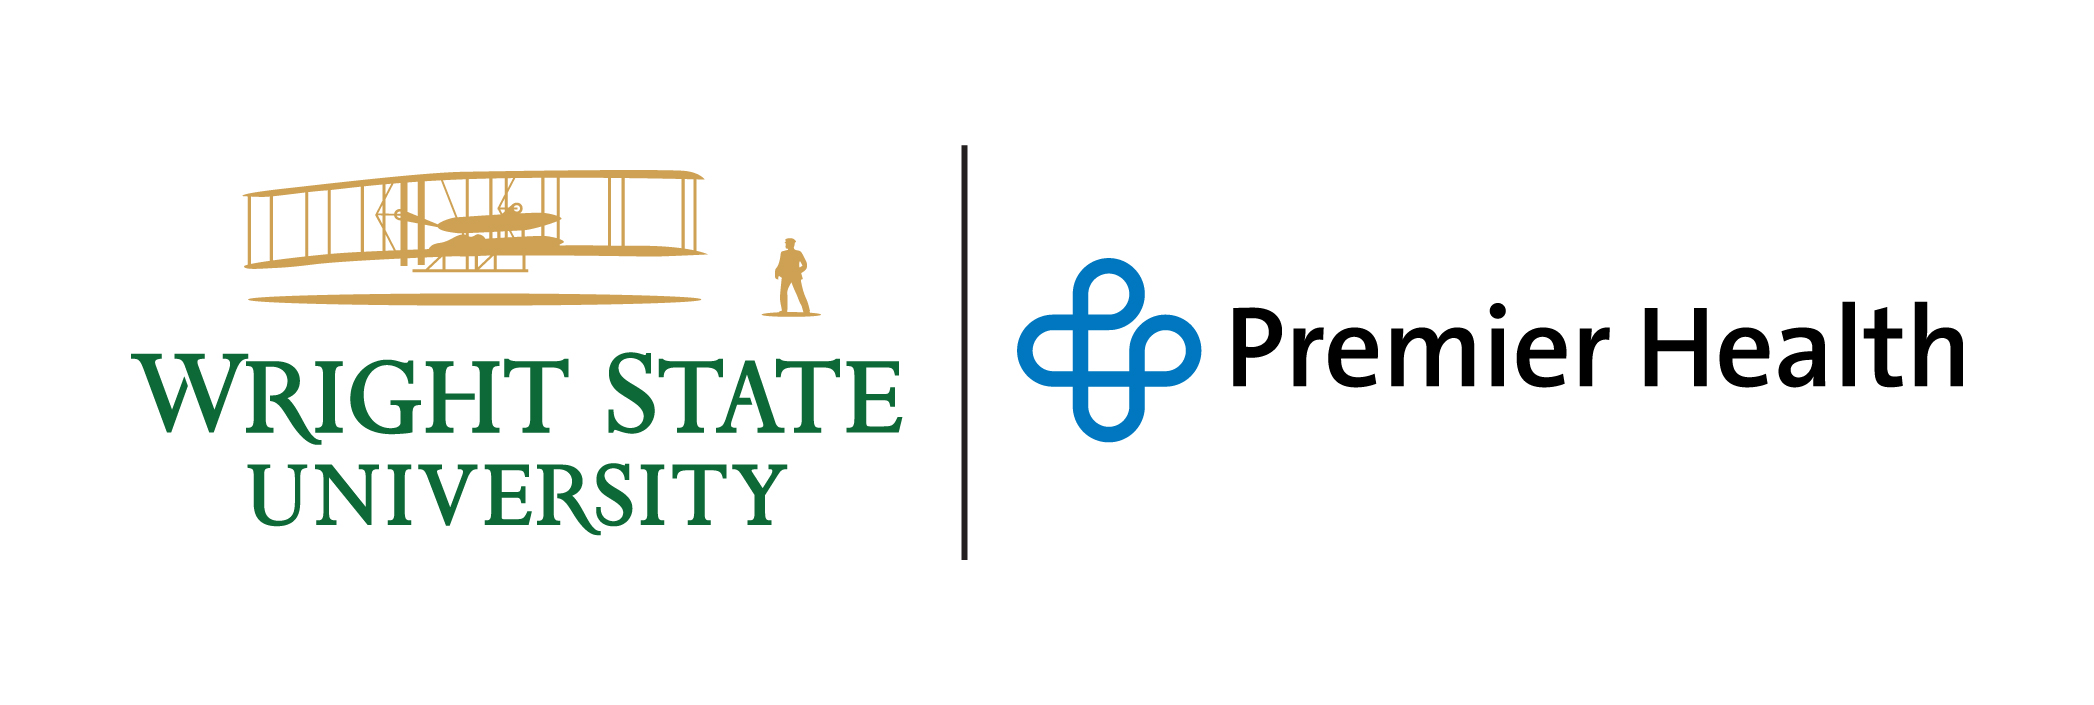 wright state premier health